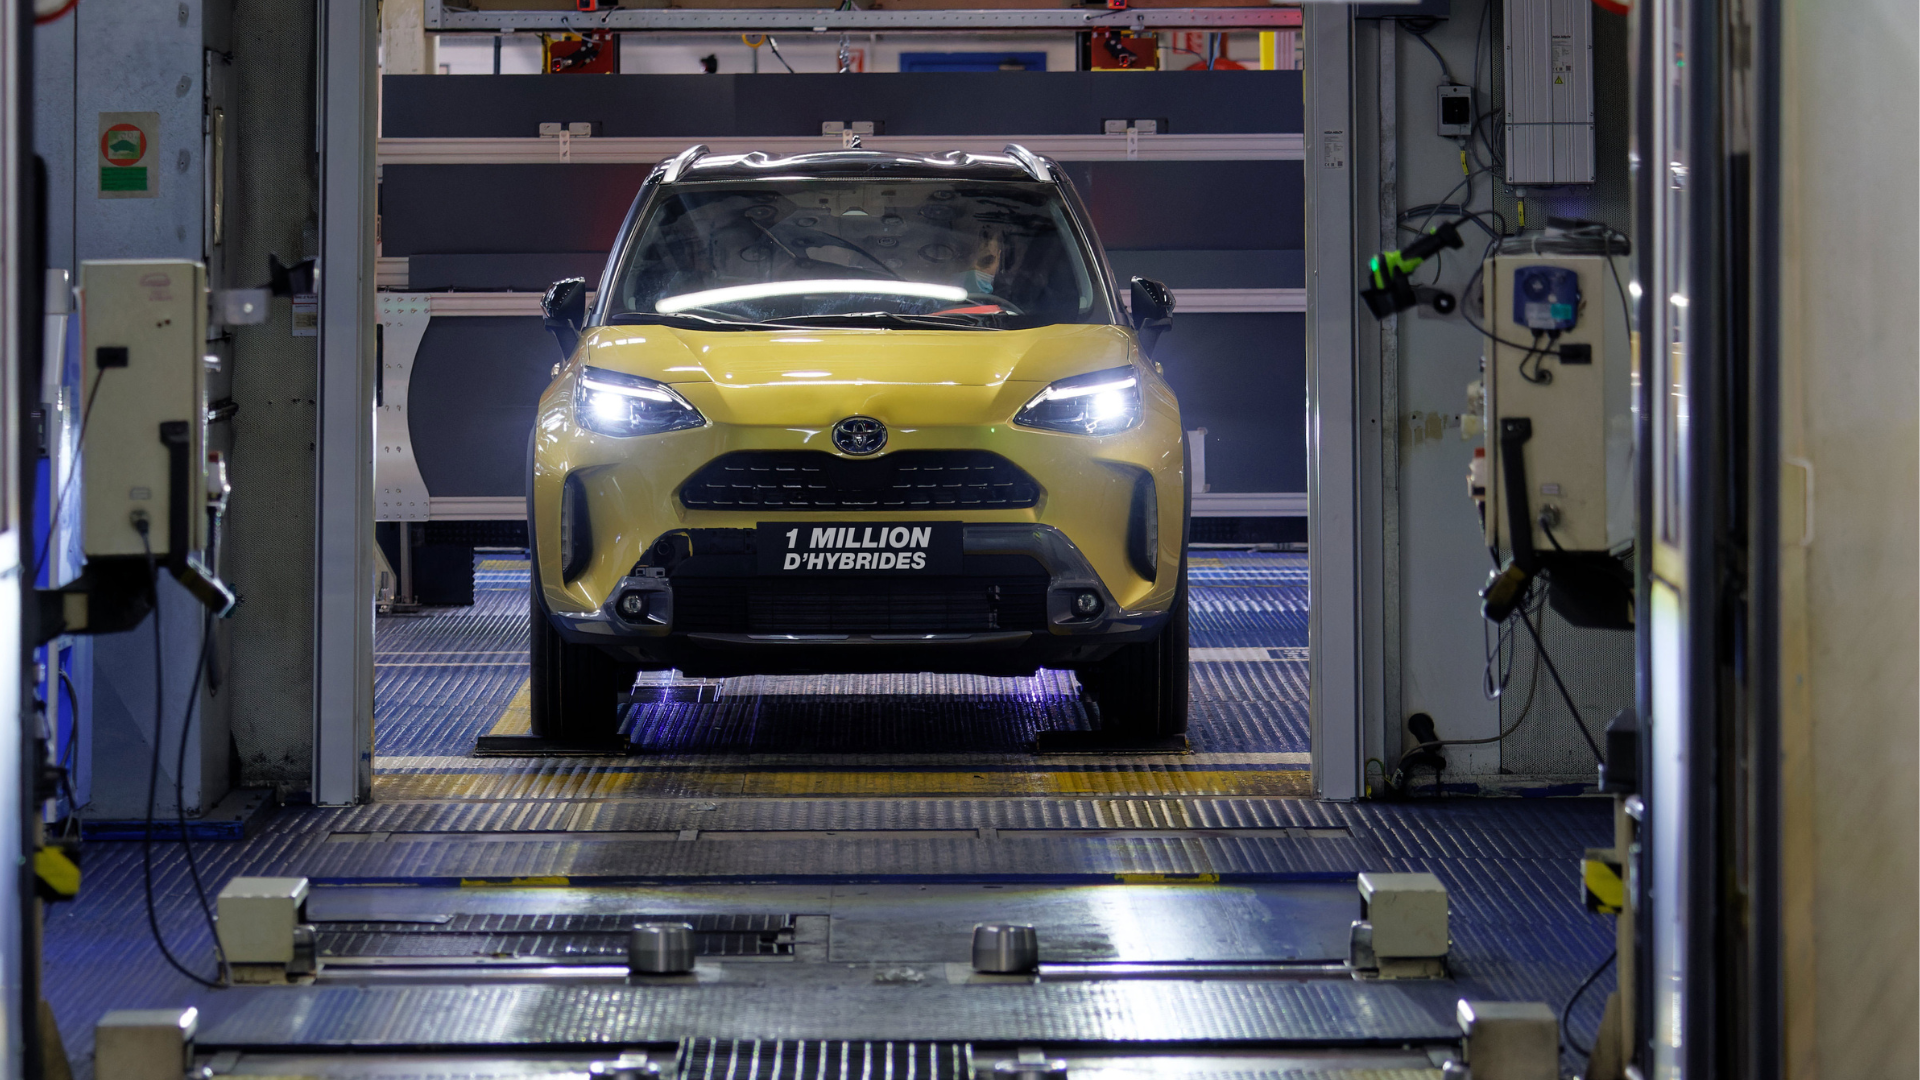 1 million hybrid vehicles produced in 10 years at the Toyota Valenciennes site